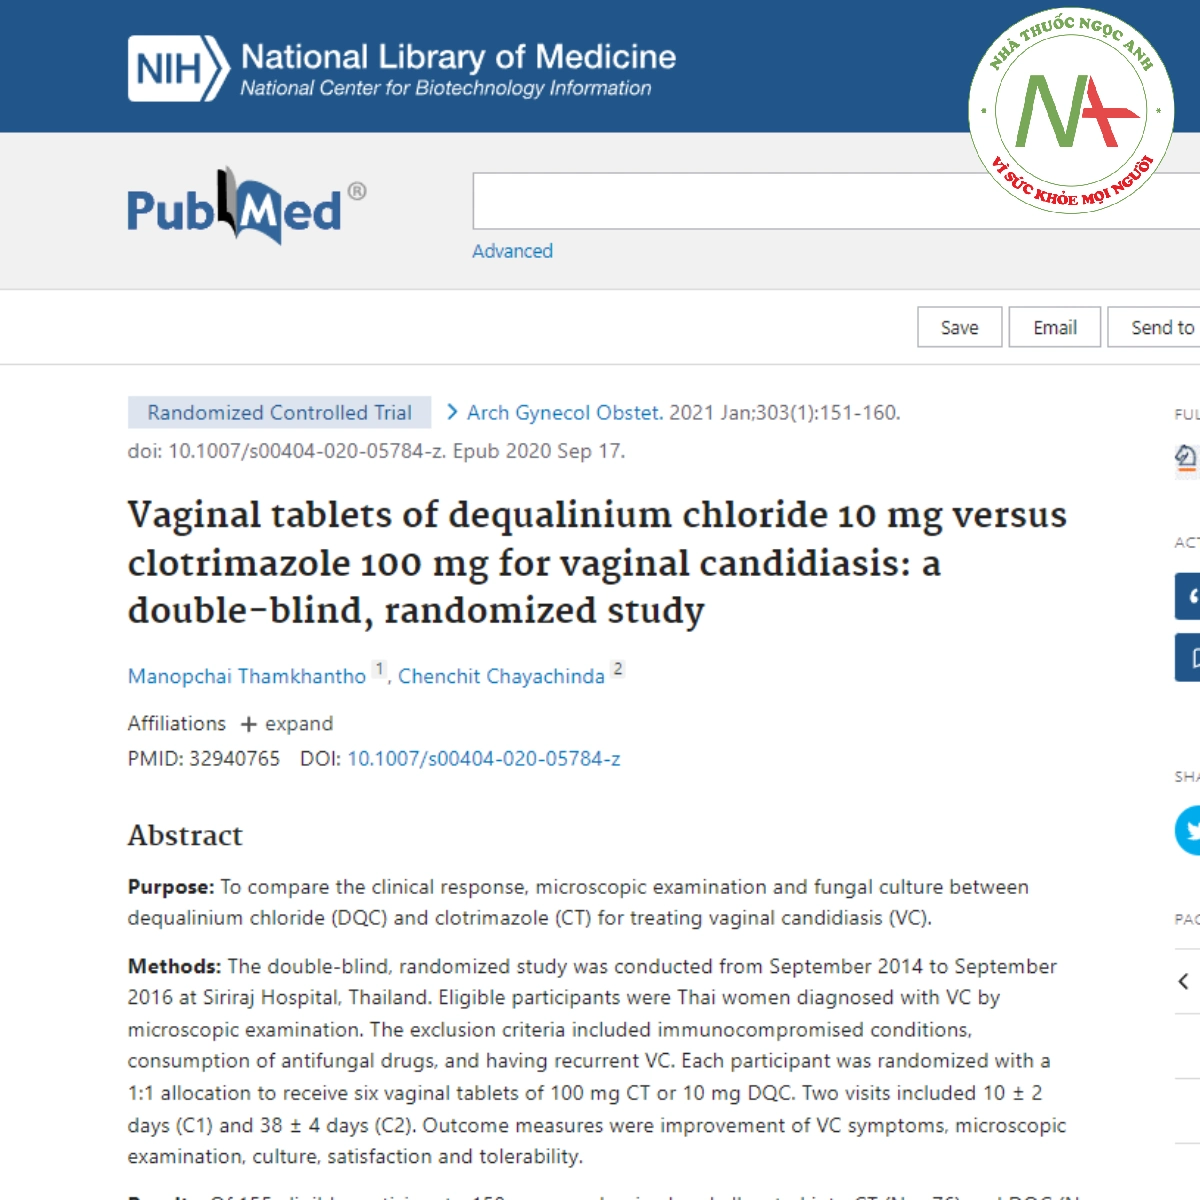 Vaginal tablets of dequalinium chloride 10 mg versus clotrimazole 100 mg for vaginal candidiasis_ a double-blind, randomized study